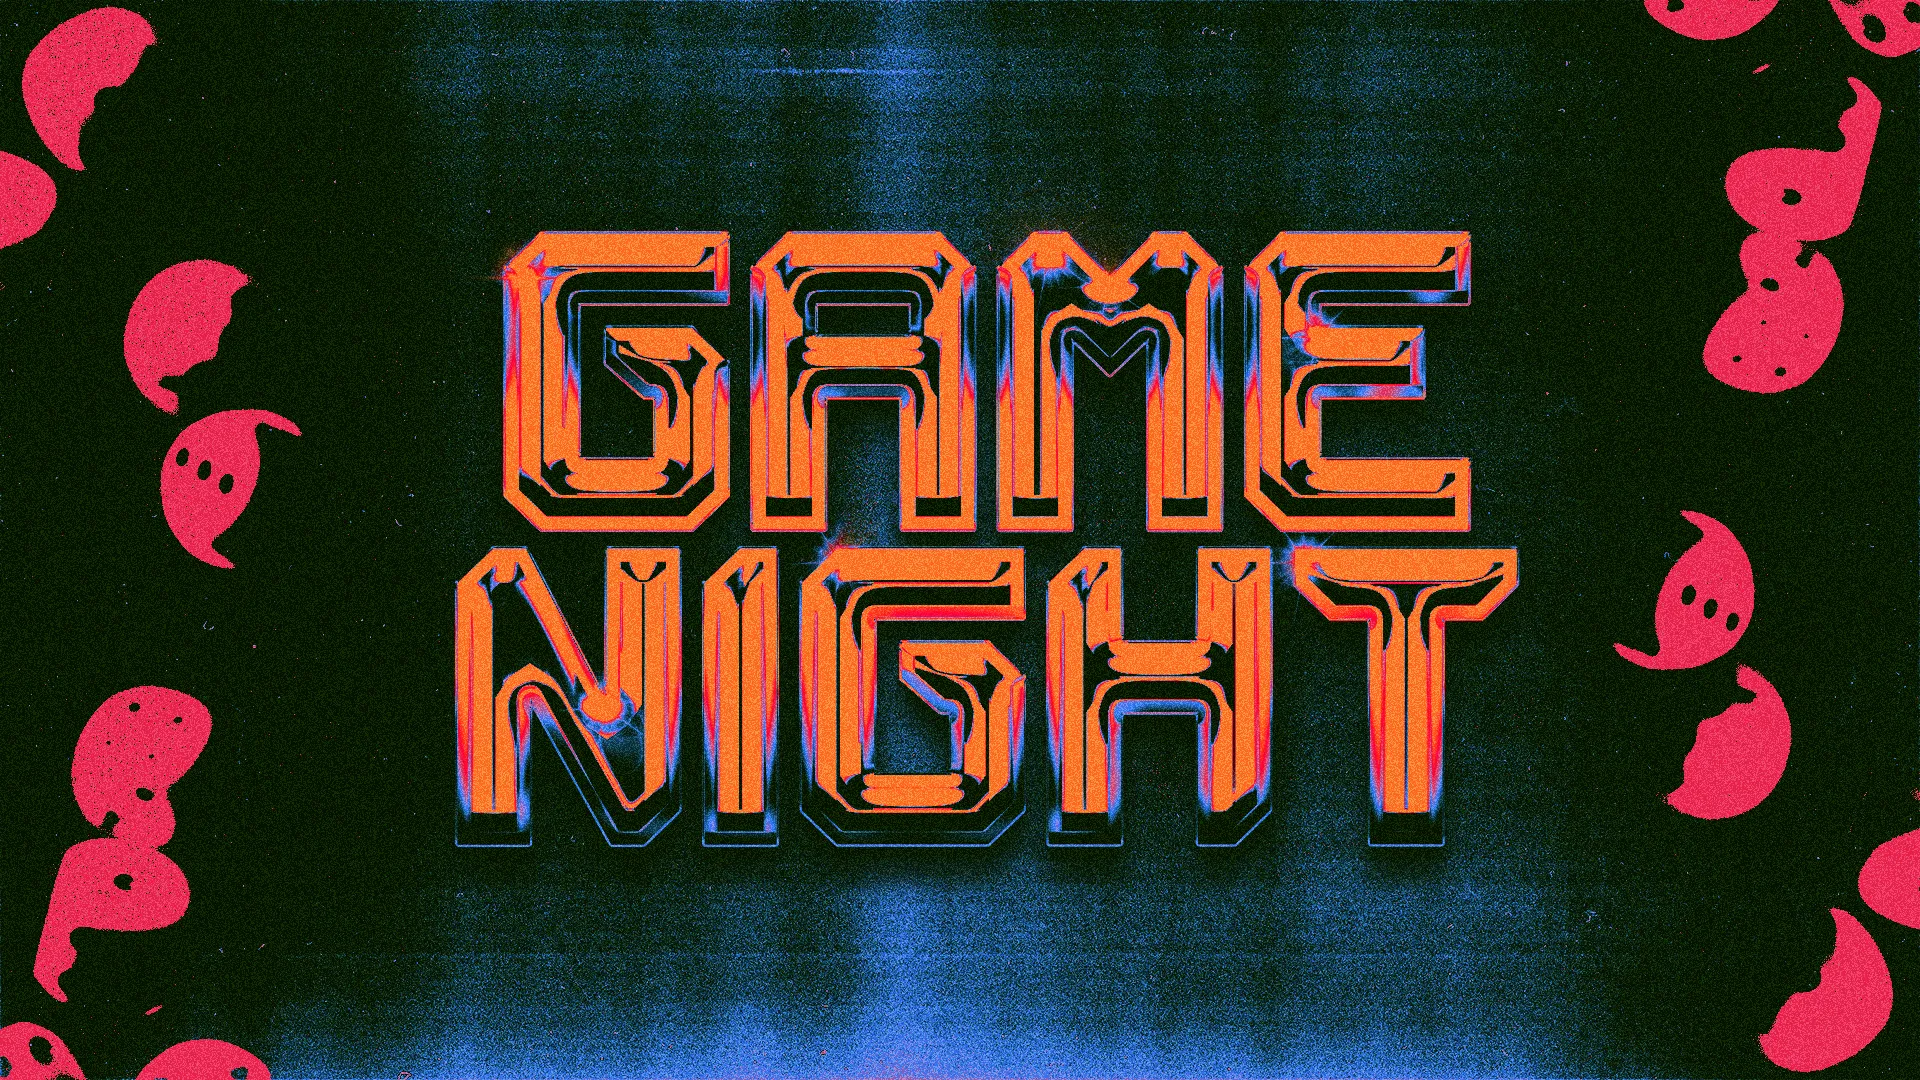 Ignite The Fun In Your Church Community With This Retro 'Game Night' Graphic, Perfect For Any Church Media Campaign That Aims To Promote Engaging, Entertaining Events.